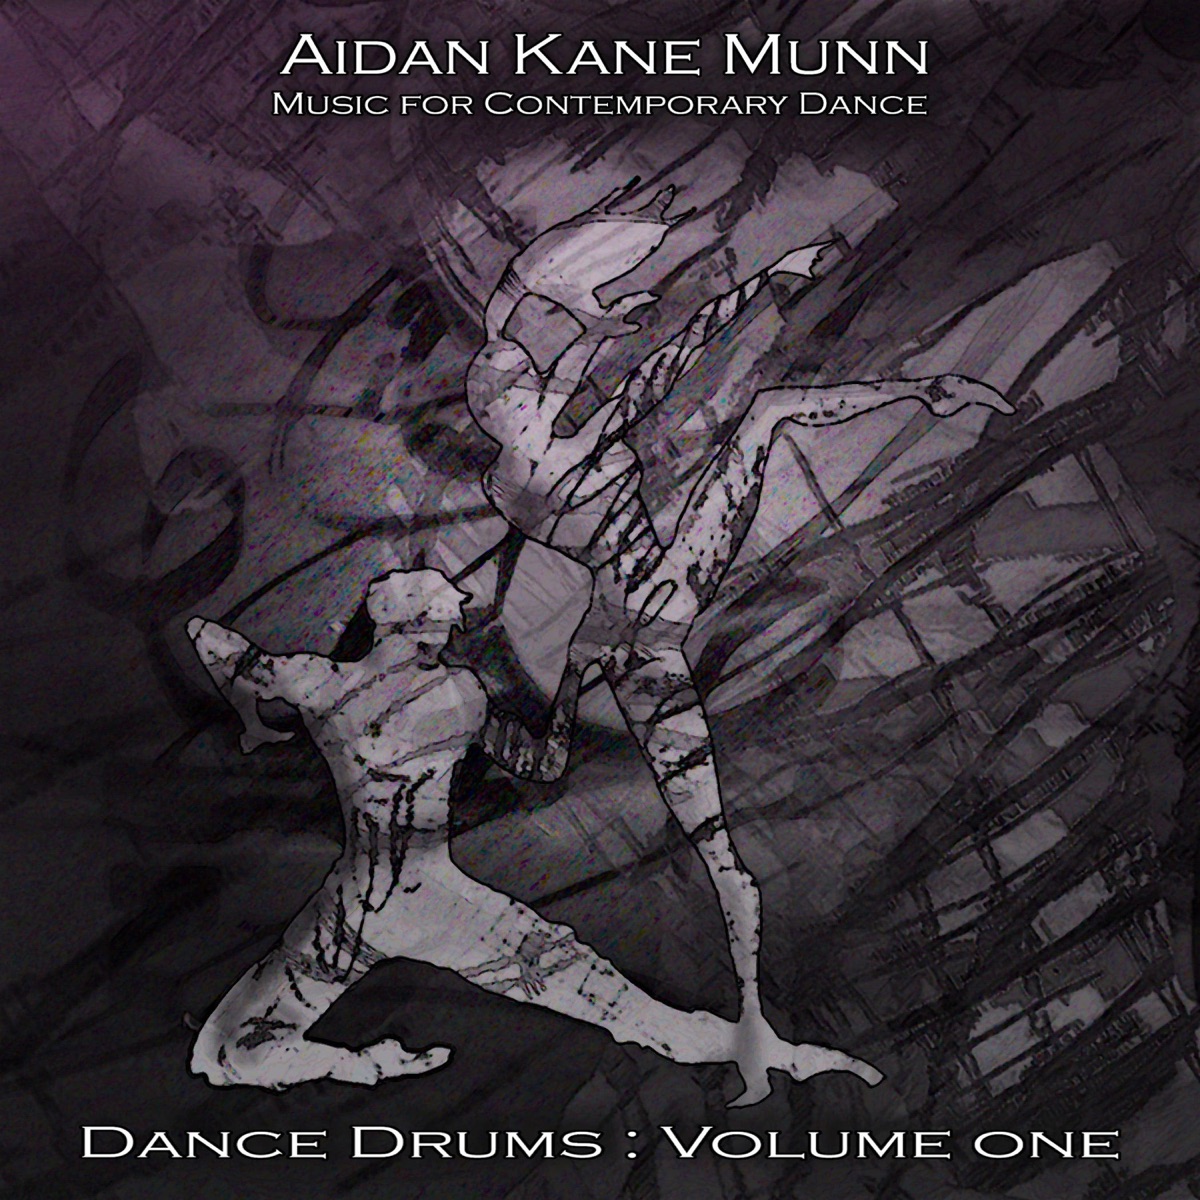 Music for Contemporary Dance, Dance Drums: Volume One by Aidan Kane Munn on  Apple Music